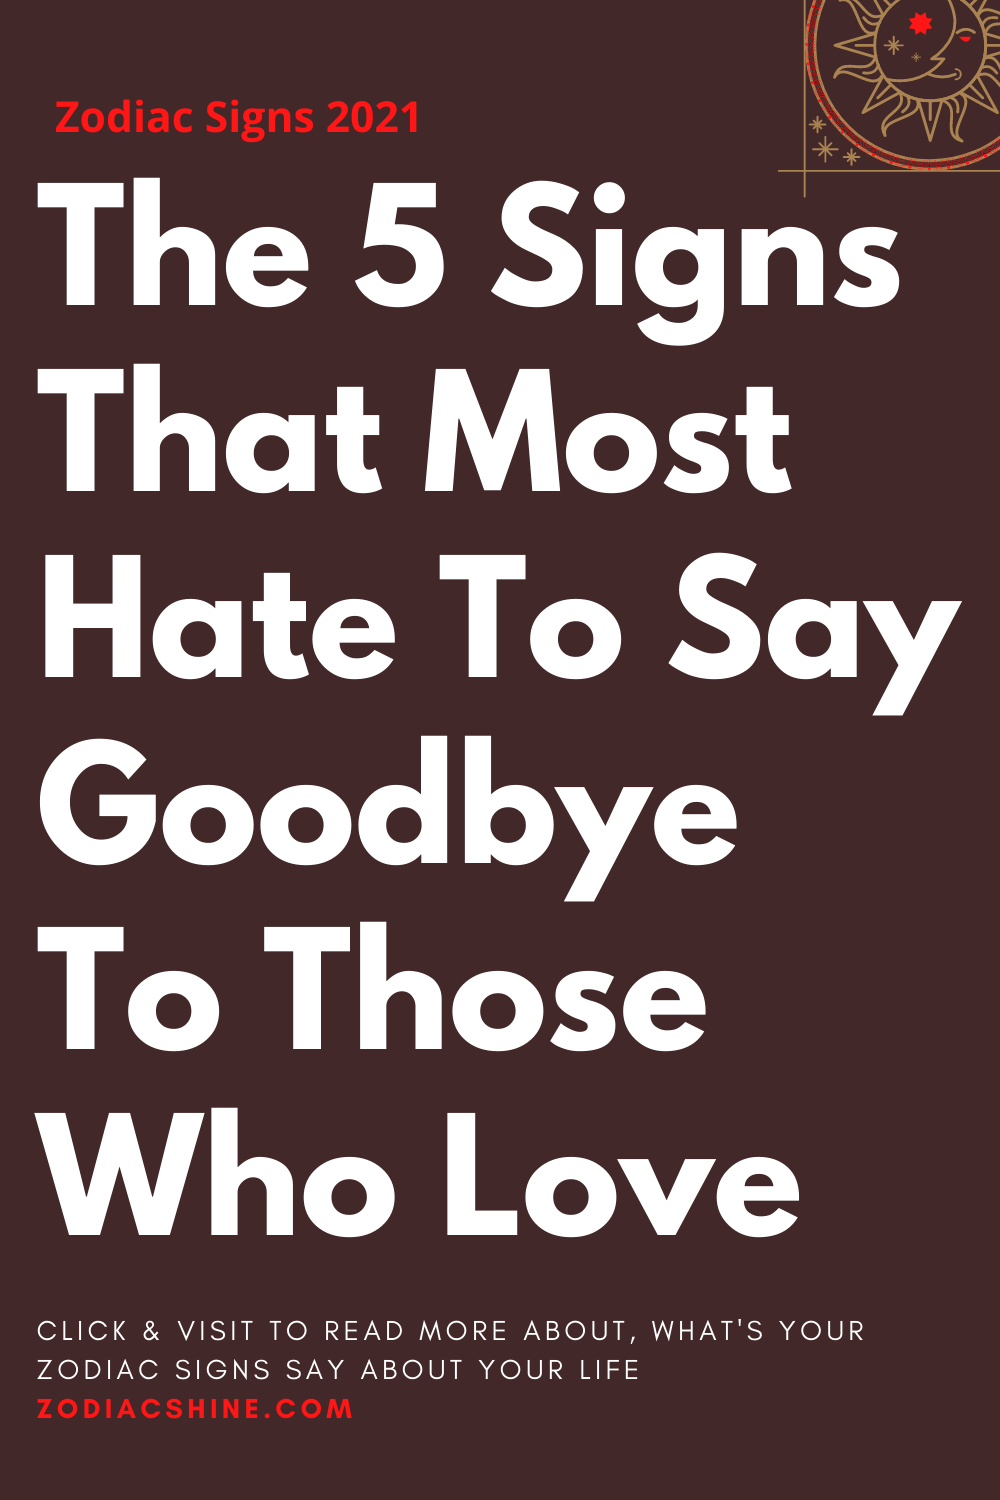 The 5 Signs That Most Hate To Say Goodbye To Those Who Love